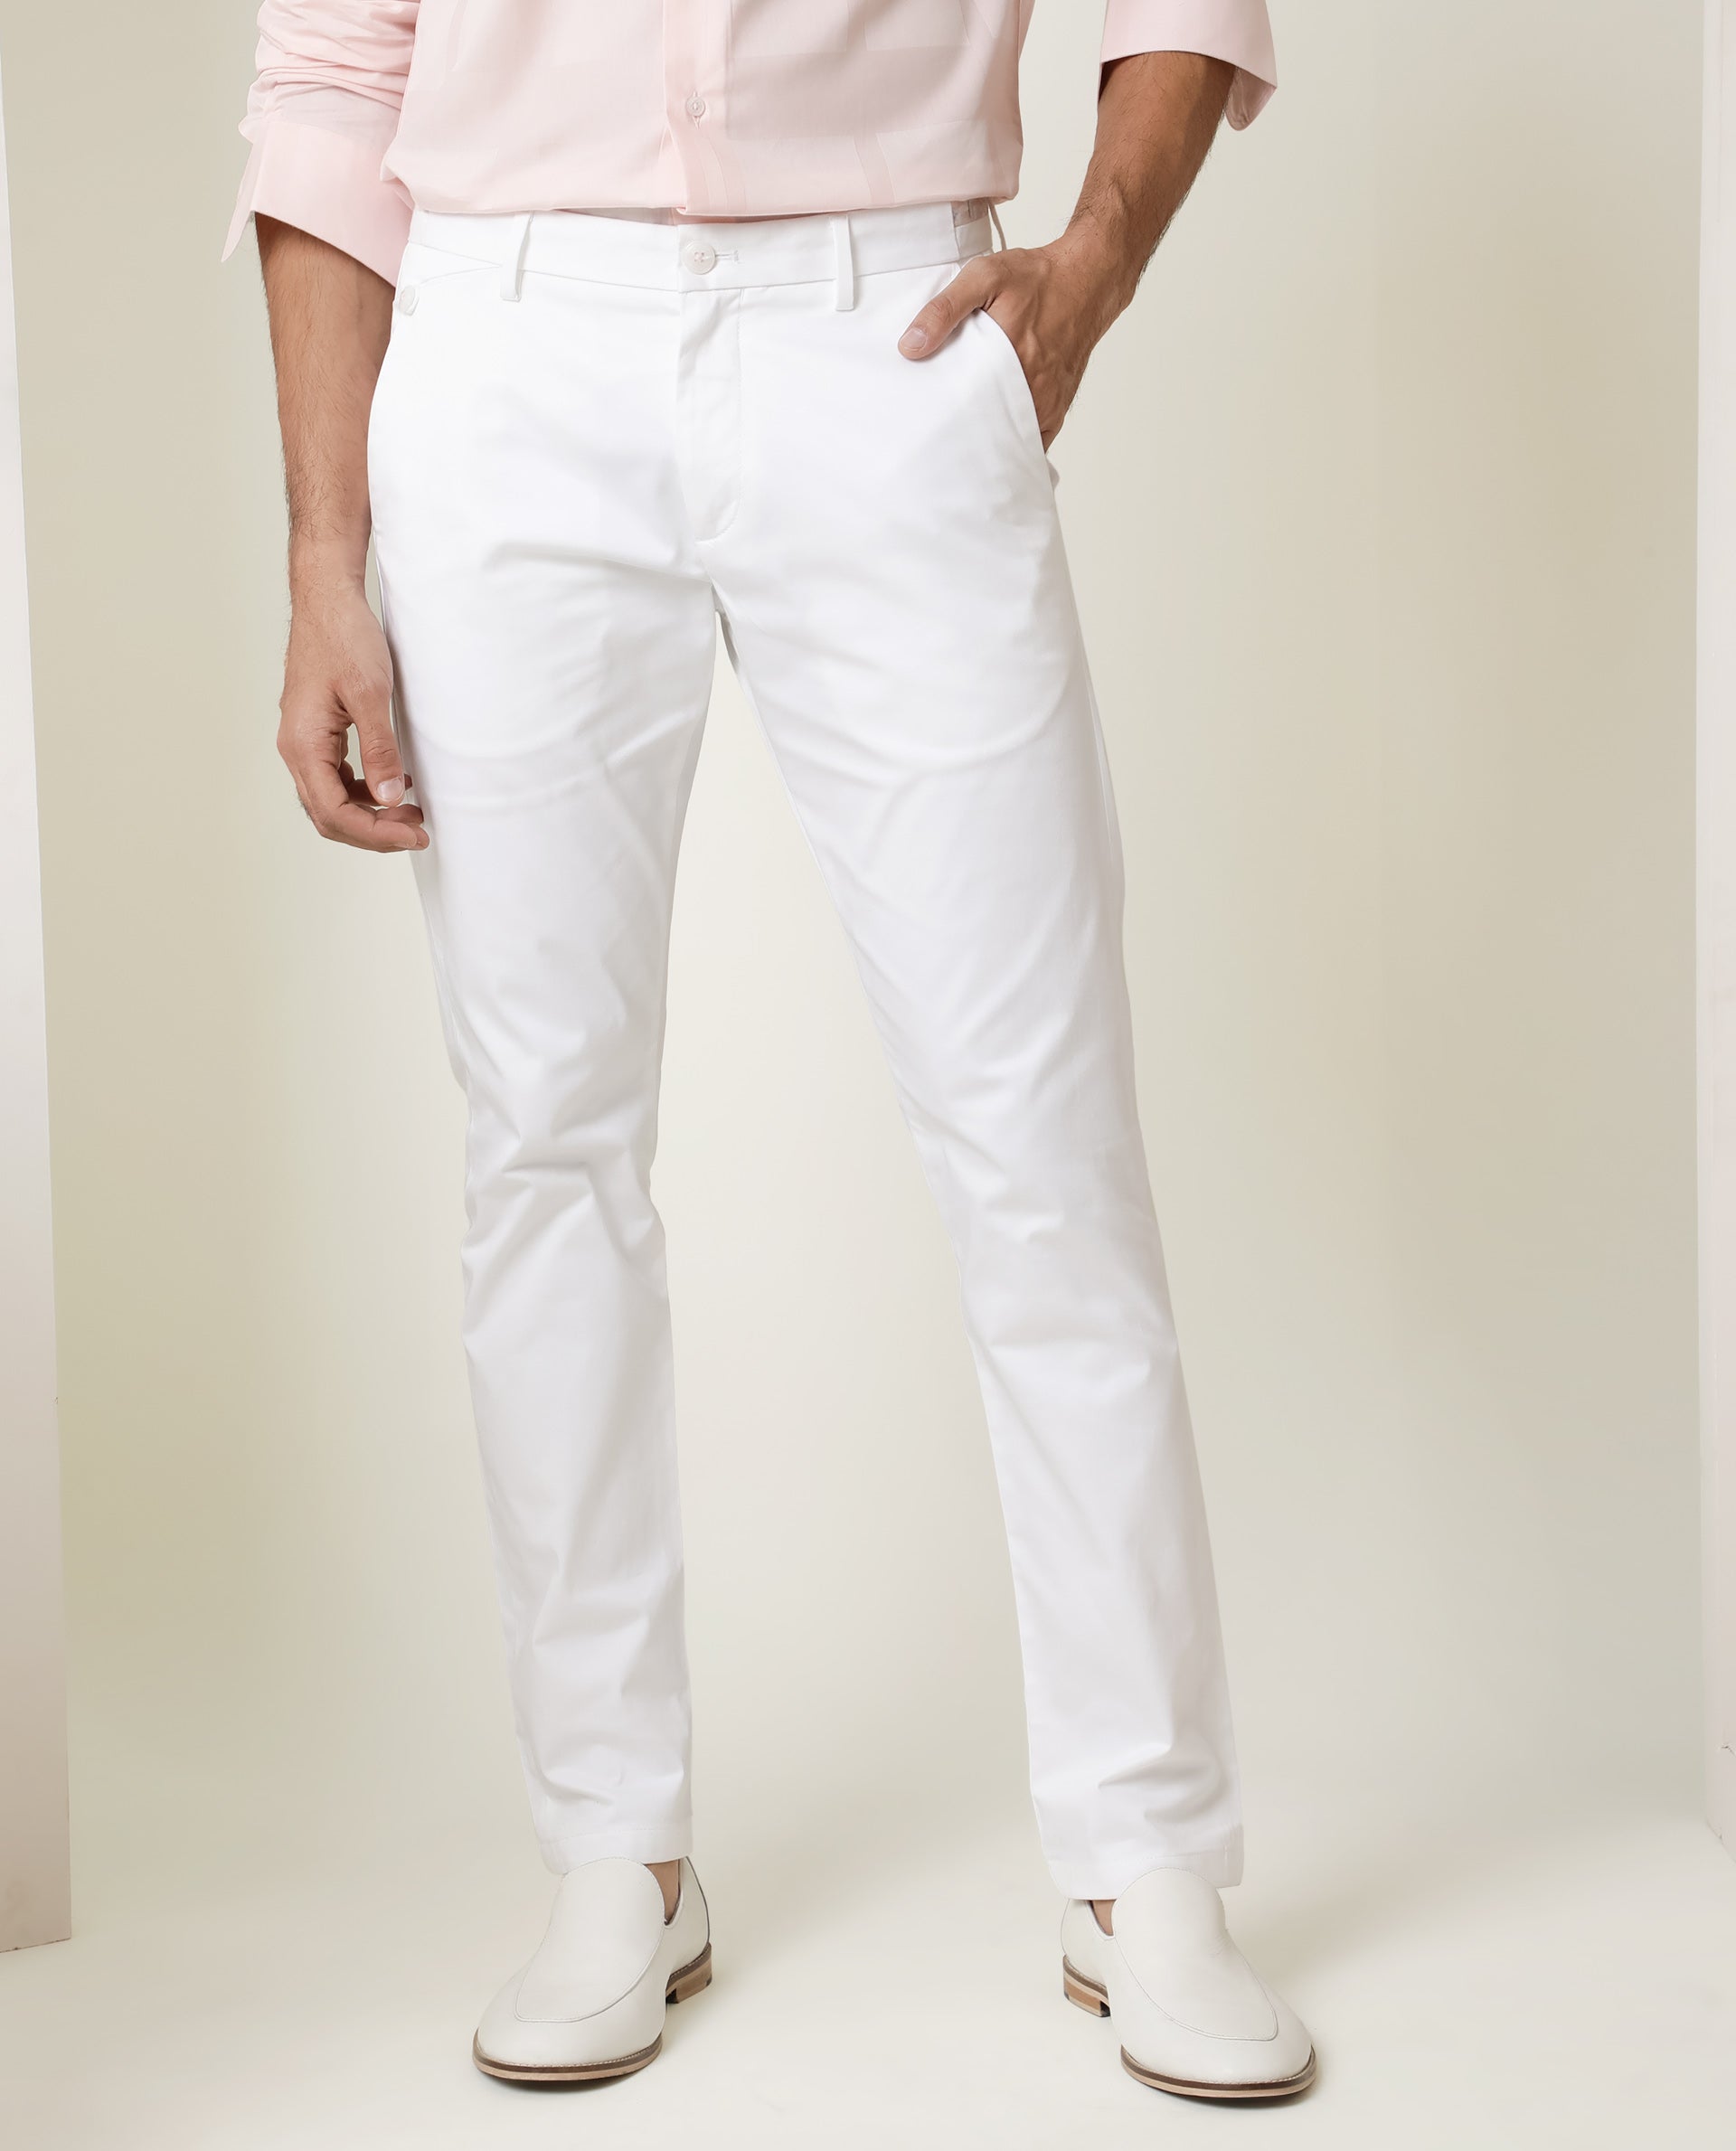 Top 82+ white trouser pants mens latest - in.cdgdbentre